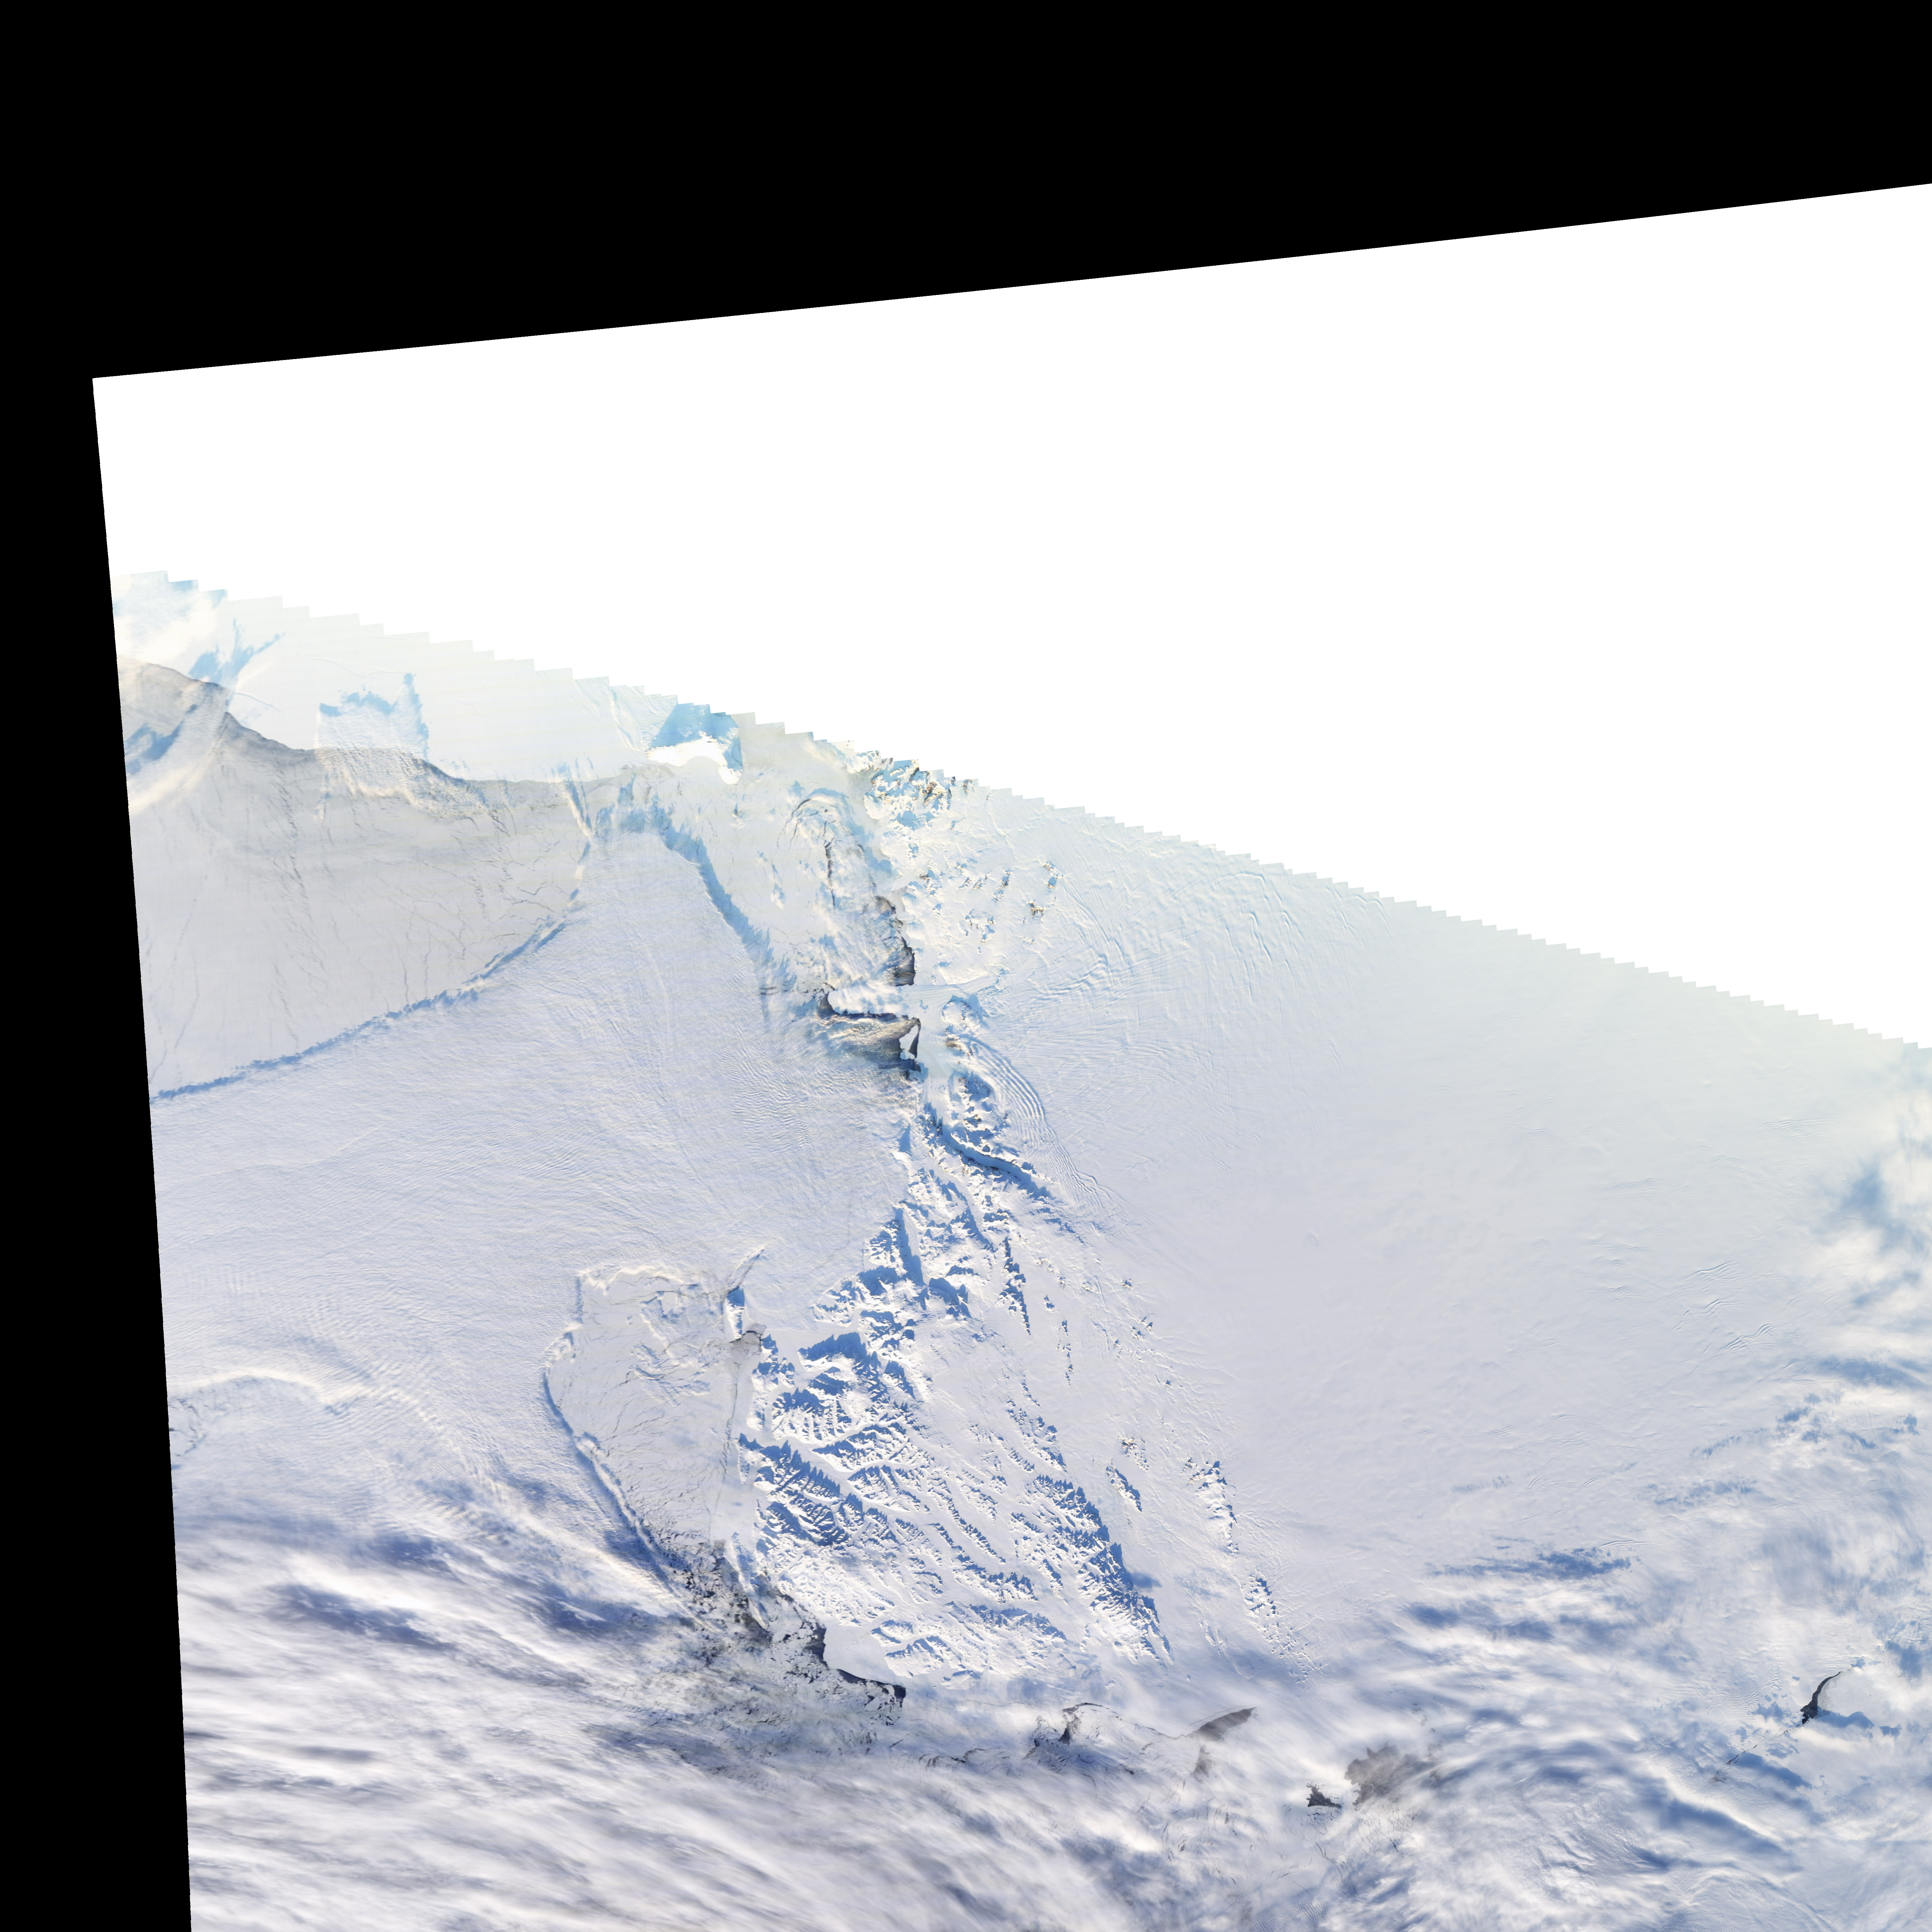 Antarctic Ice Shelf Sheds Bergs - related image preview